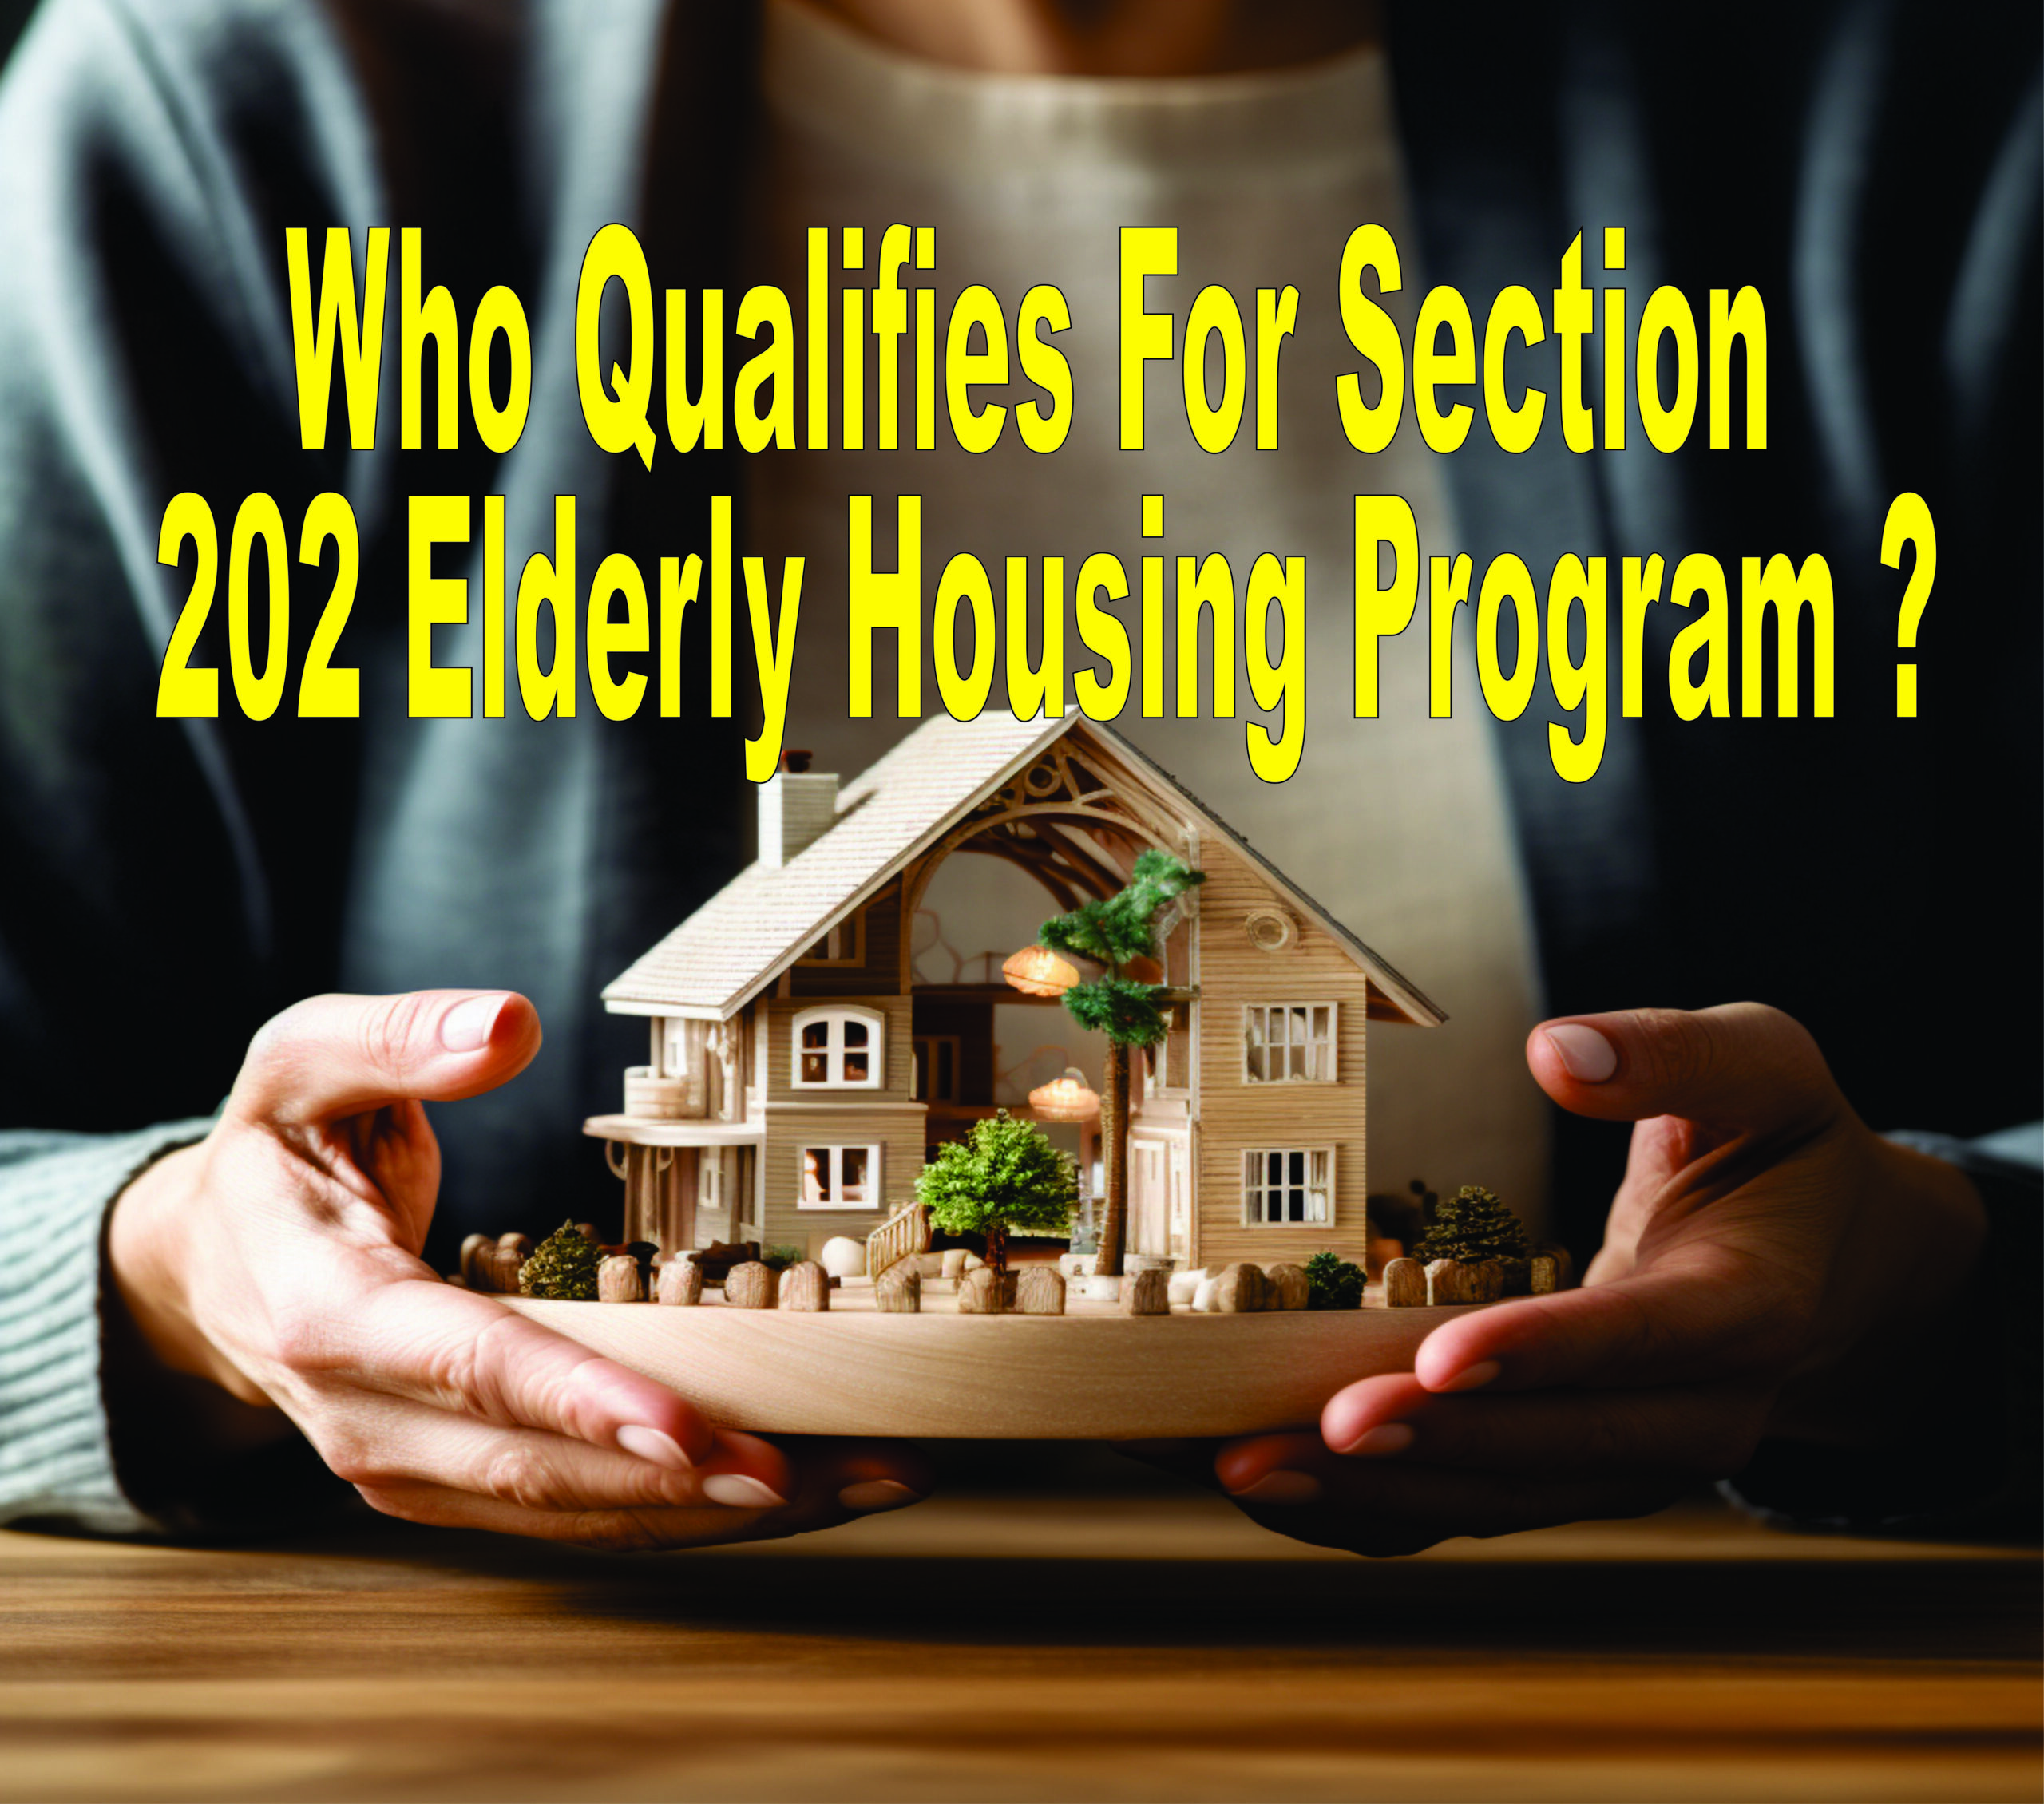 Who Qualifies For Section 202 Elderly Housing Program